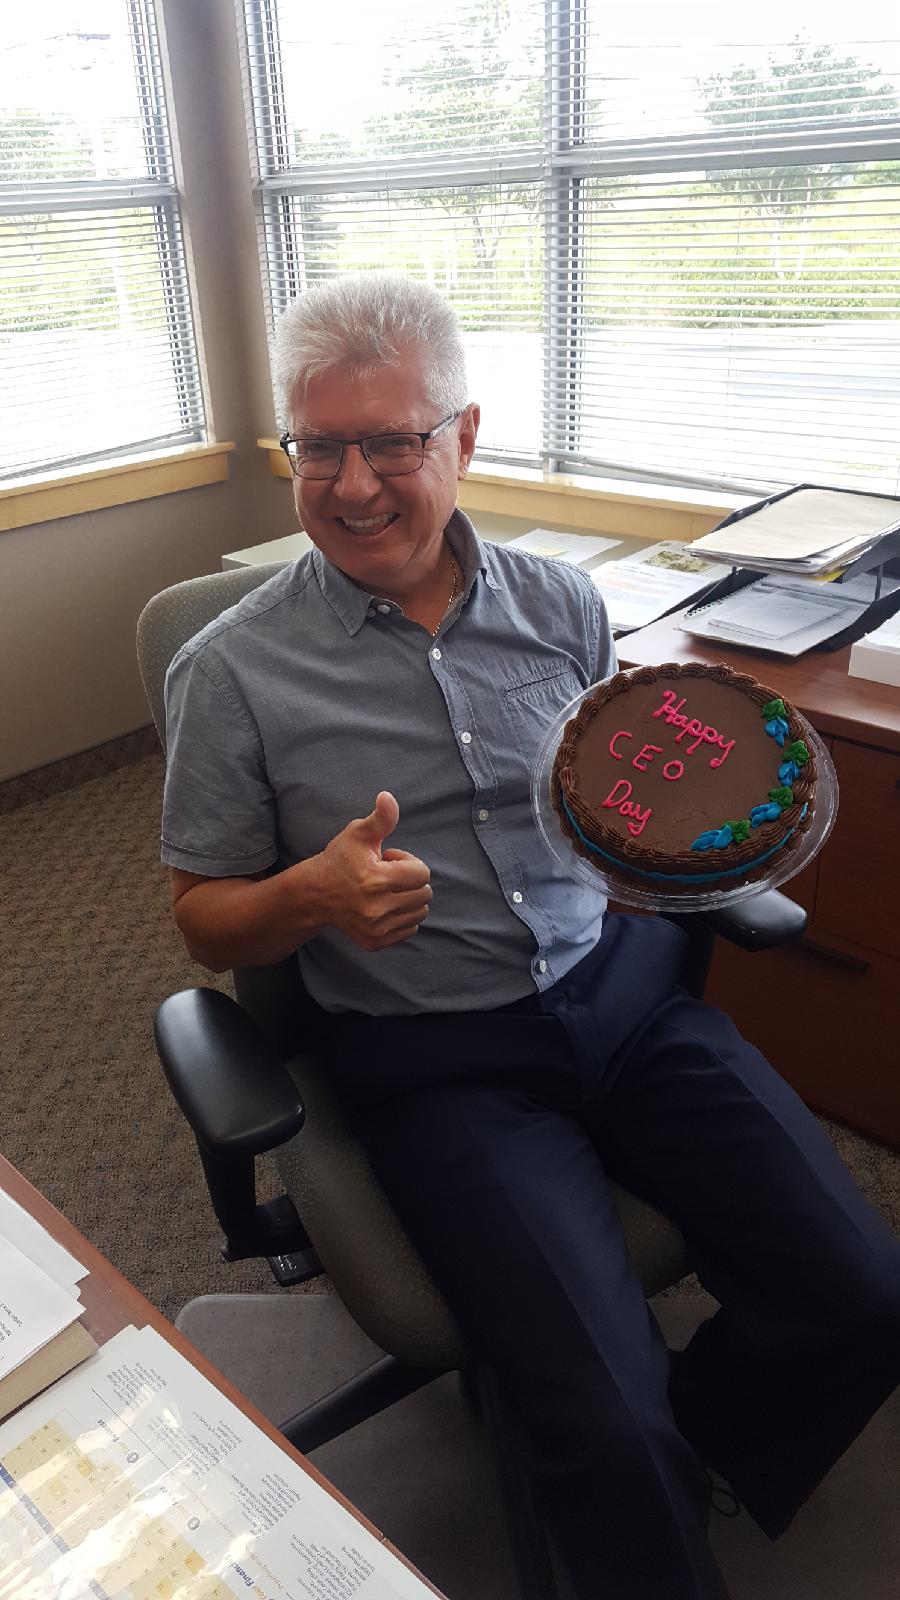 The first ever, CEO Day and it originated on August 22, 2019 from a great group of employees at PSCU! Thank-you everyone, Brian.